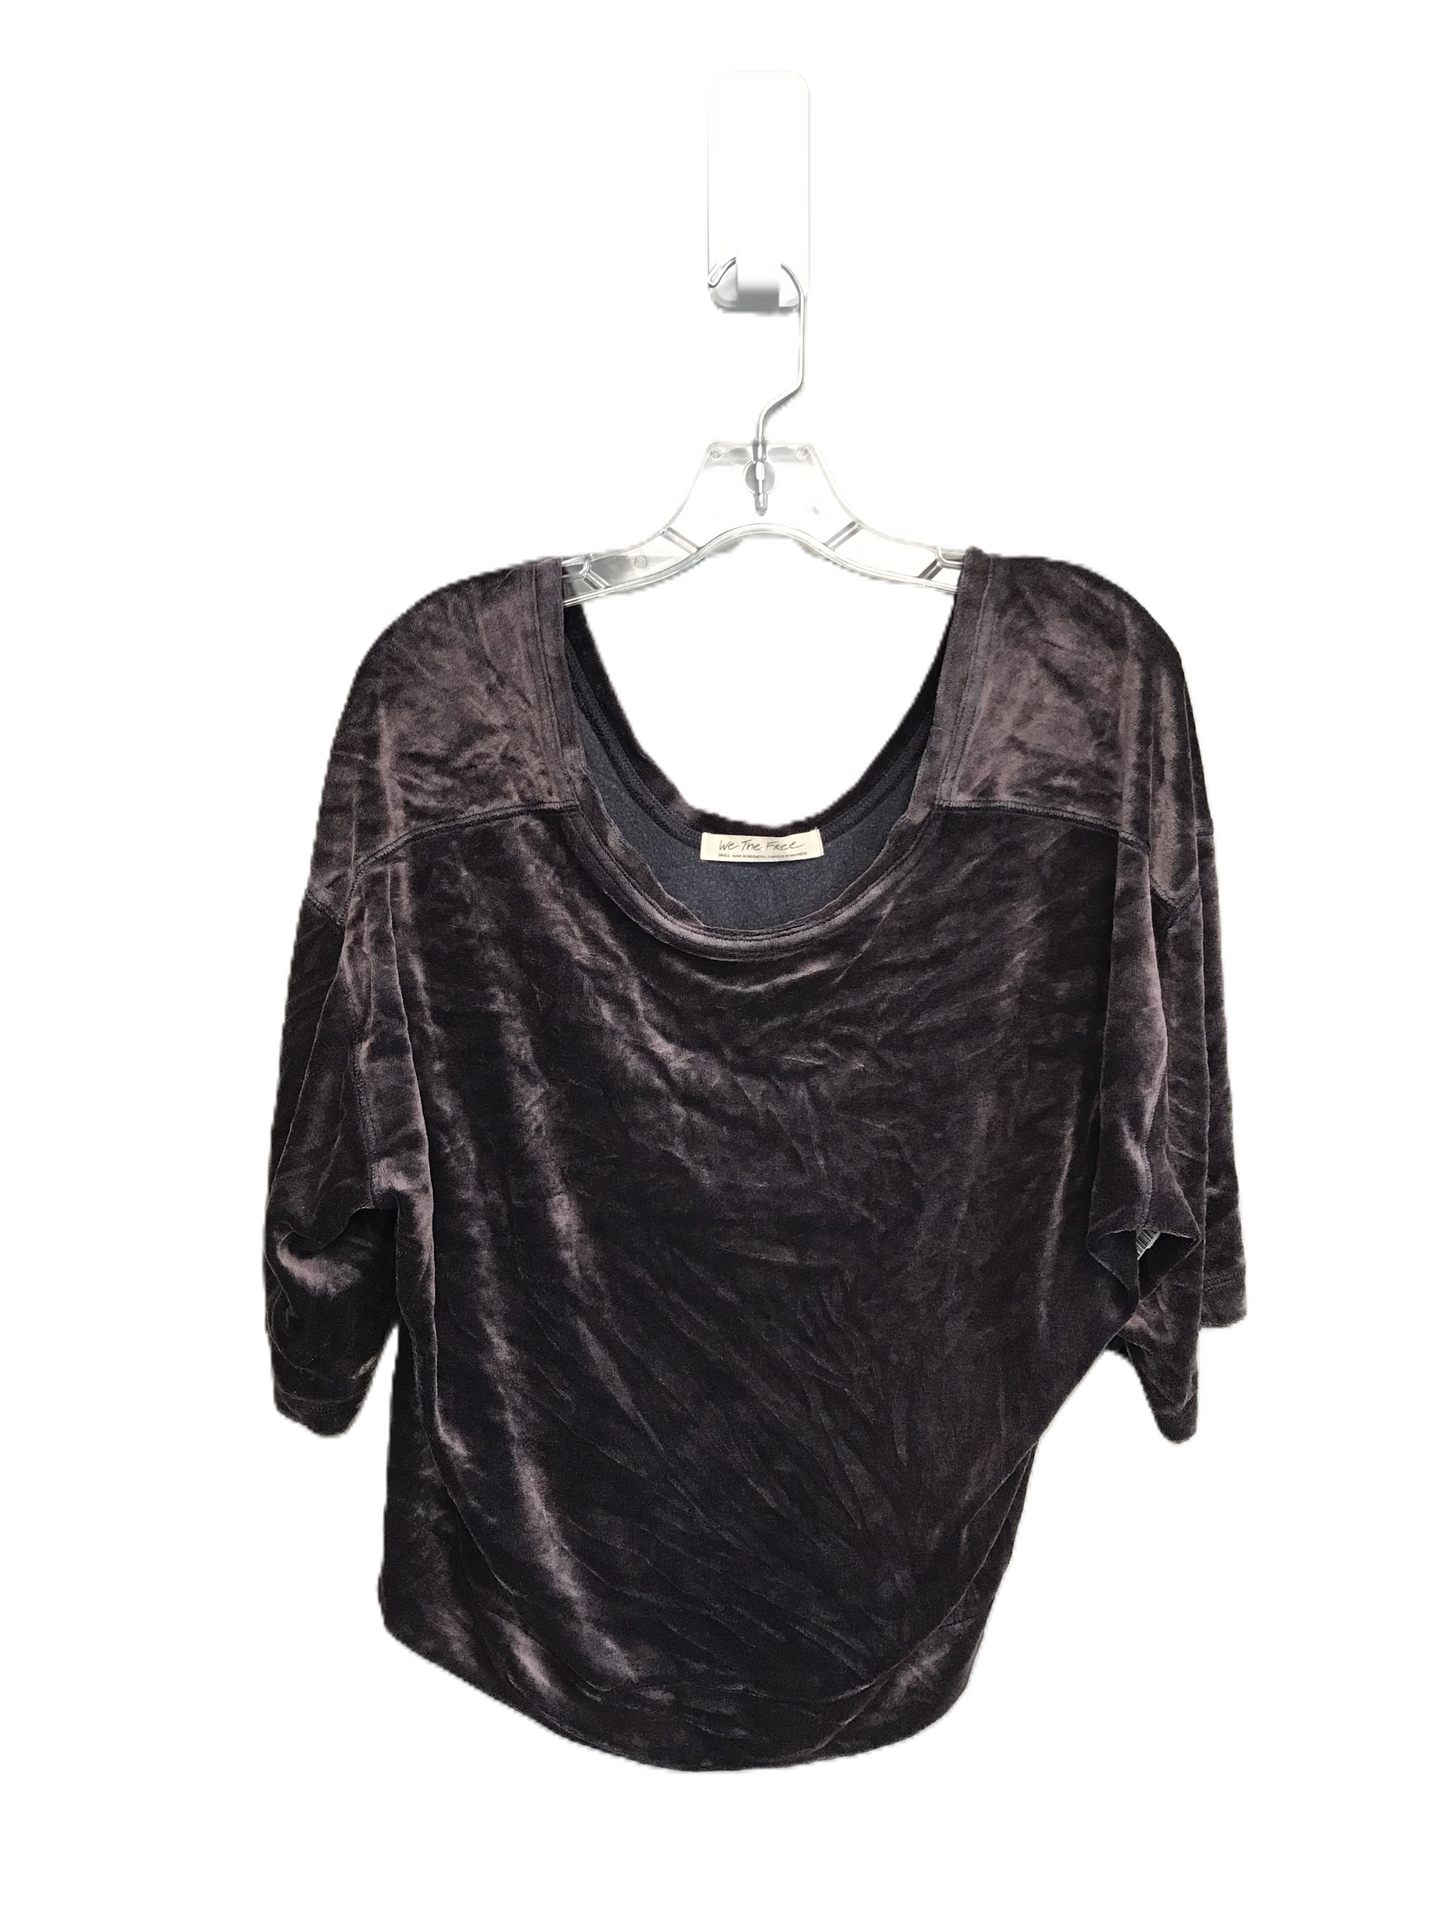 Purple Top Short Sleeve By We The Free, Size: S